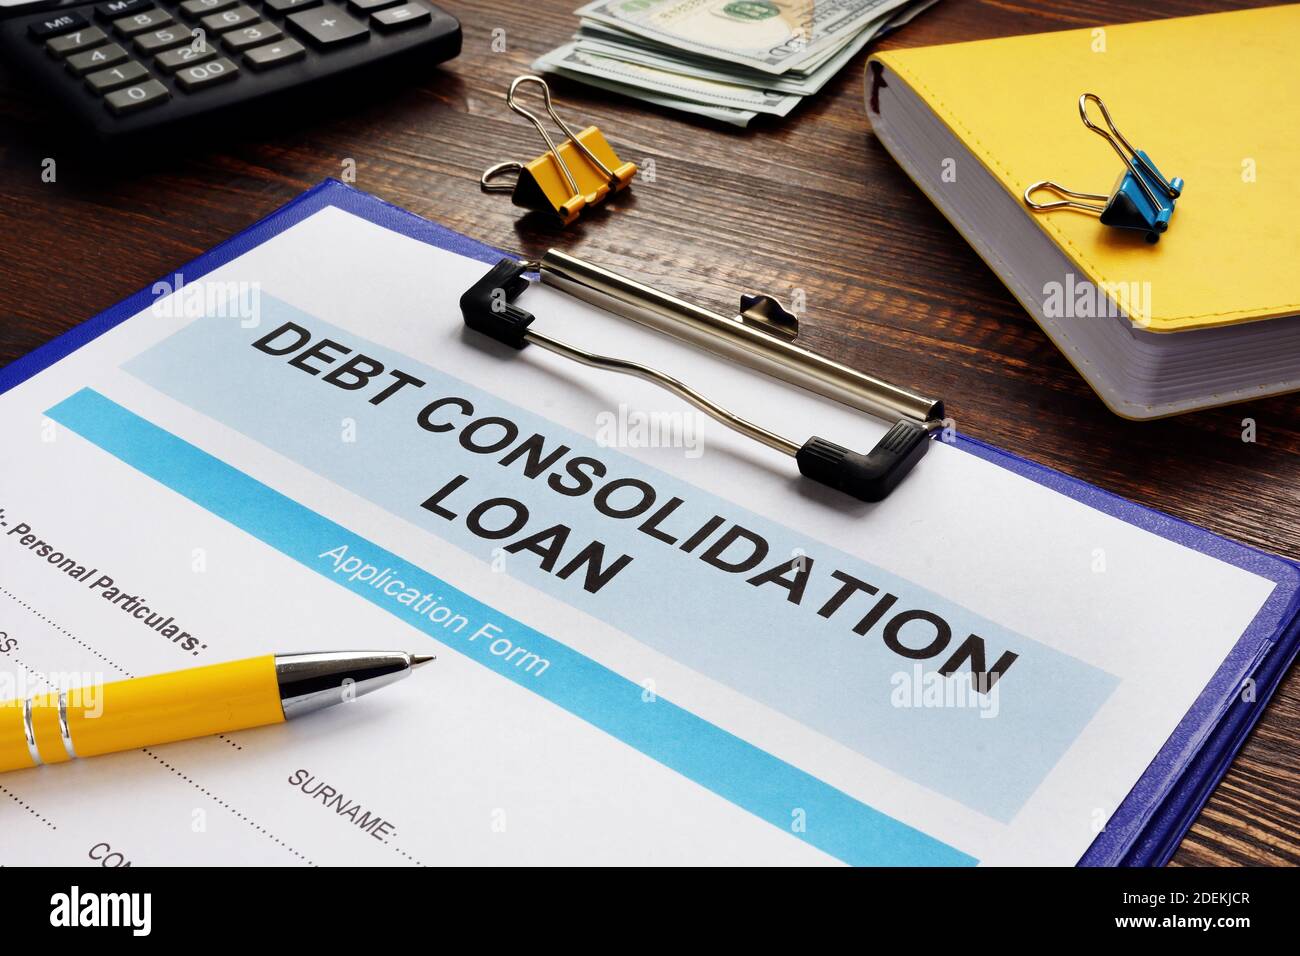 Debt consolidation loan form, notepad and calculator. Stock Photo